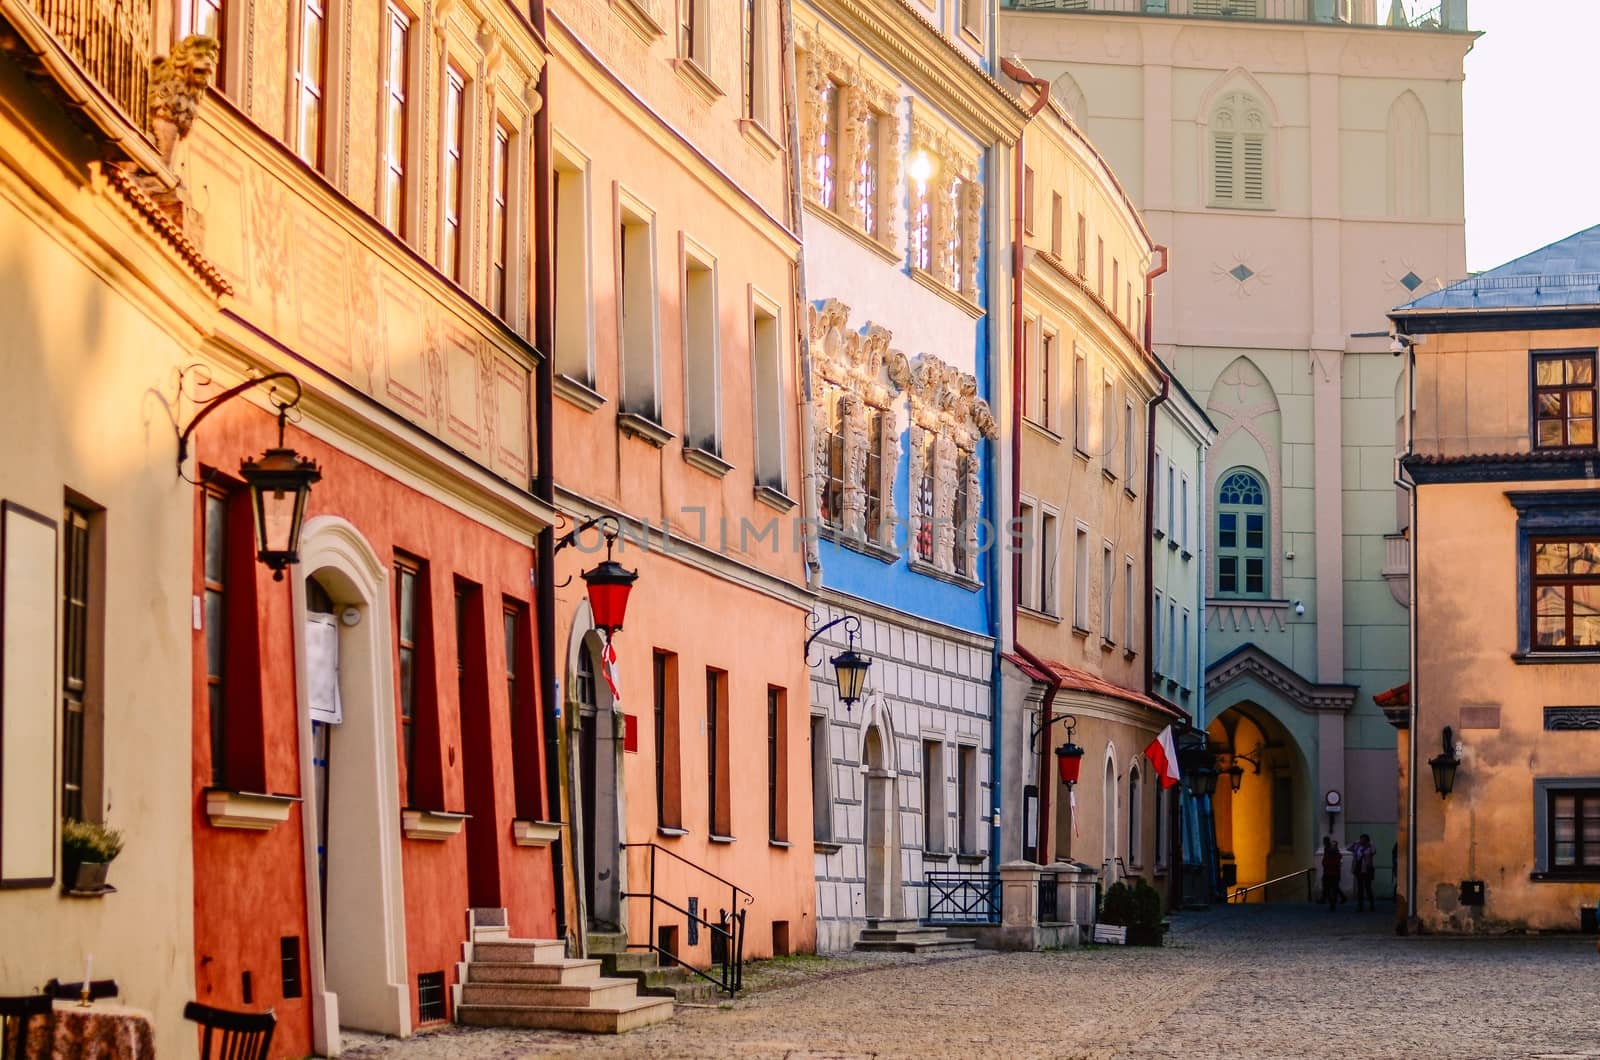 Slanted colorful houses in the old town in Lublin, Poland by chernobrovin